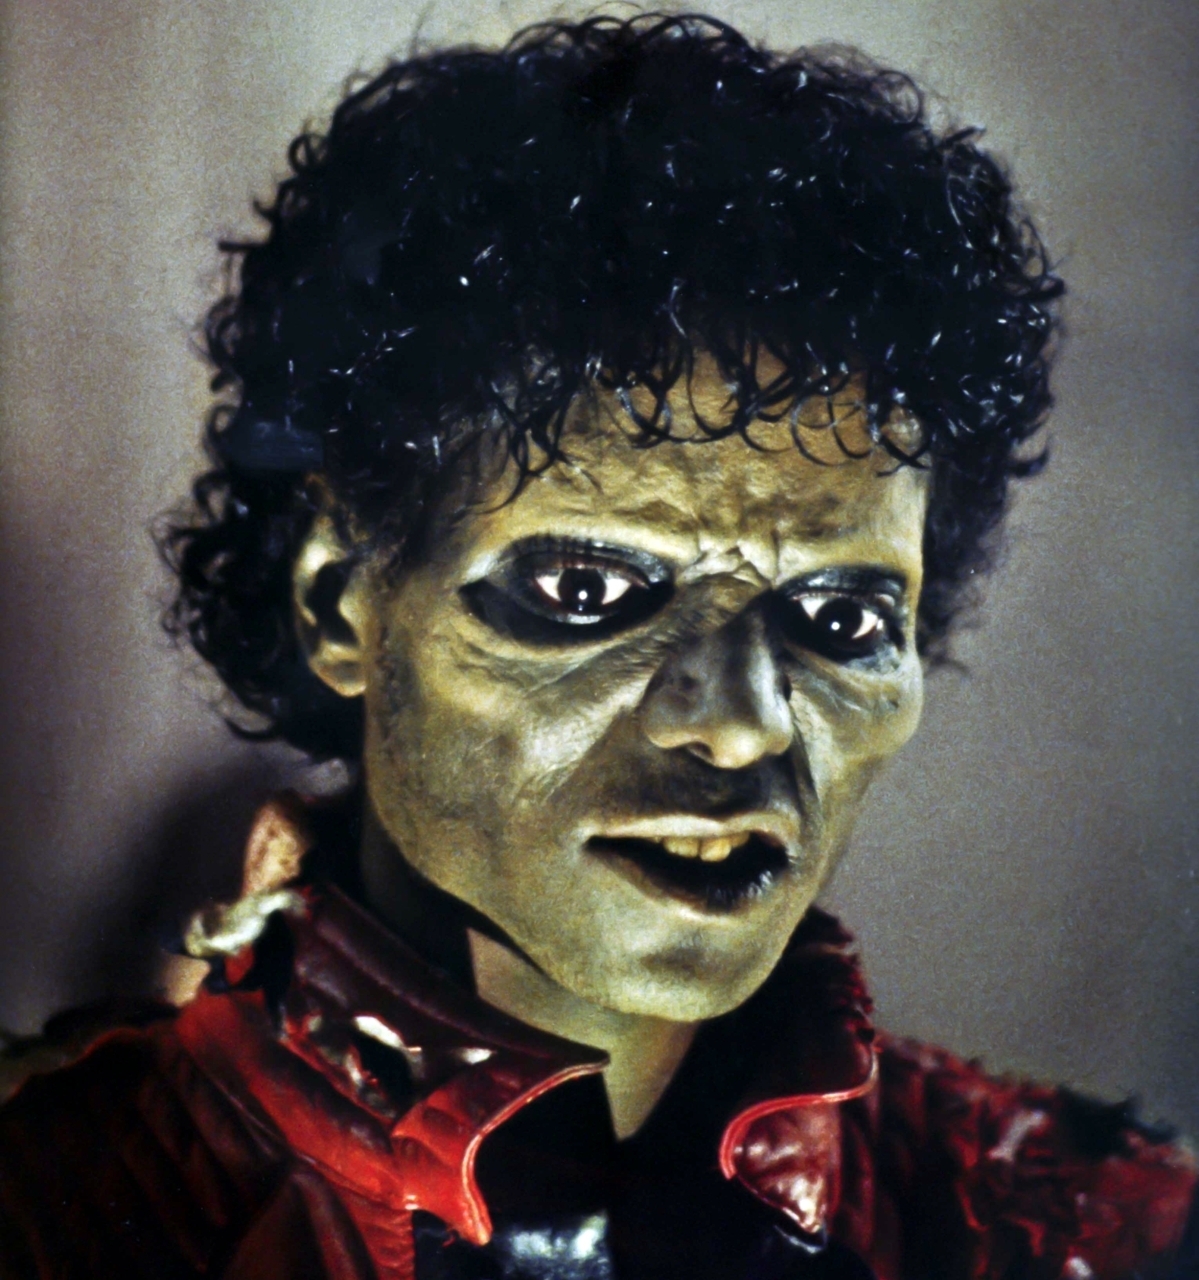 Michael Jackson as an undead character in 